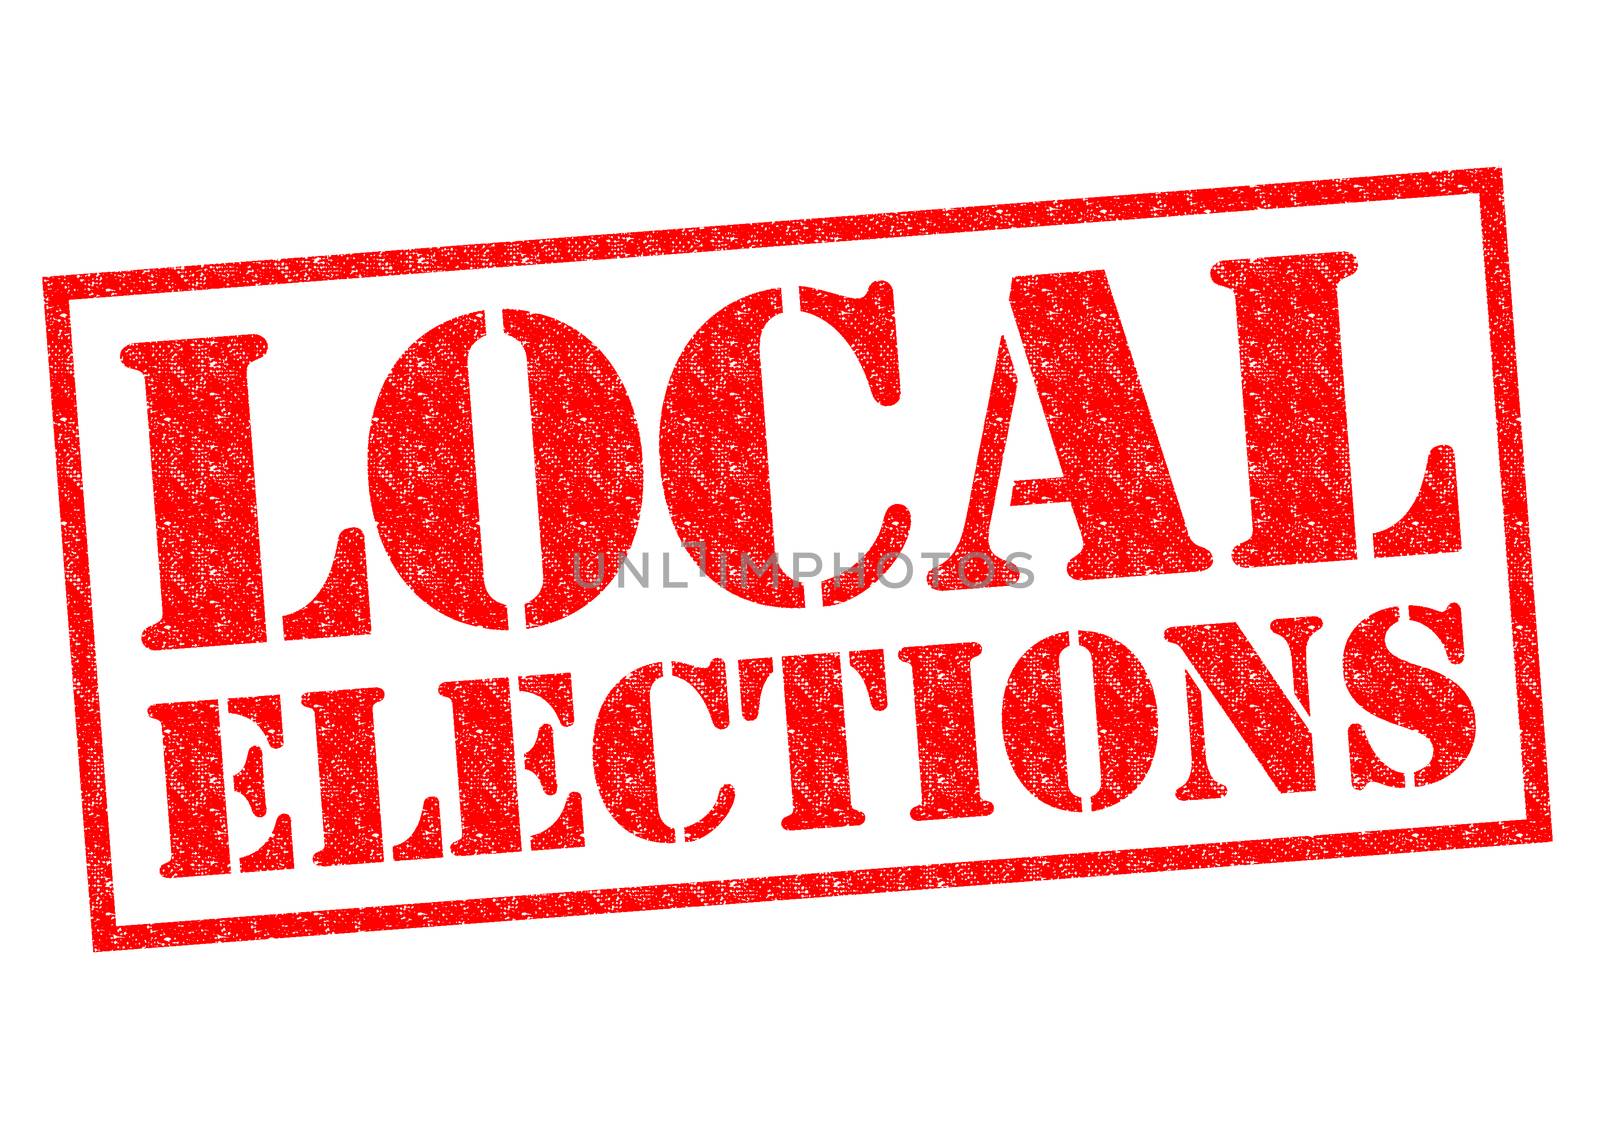 LOCAL ELECTIONS by chrisdorney